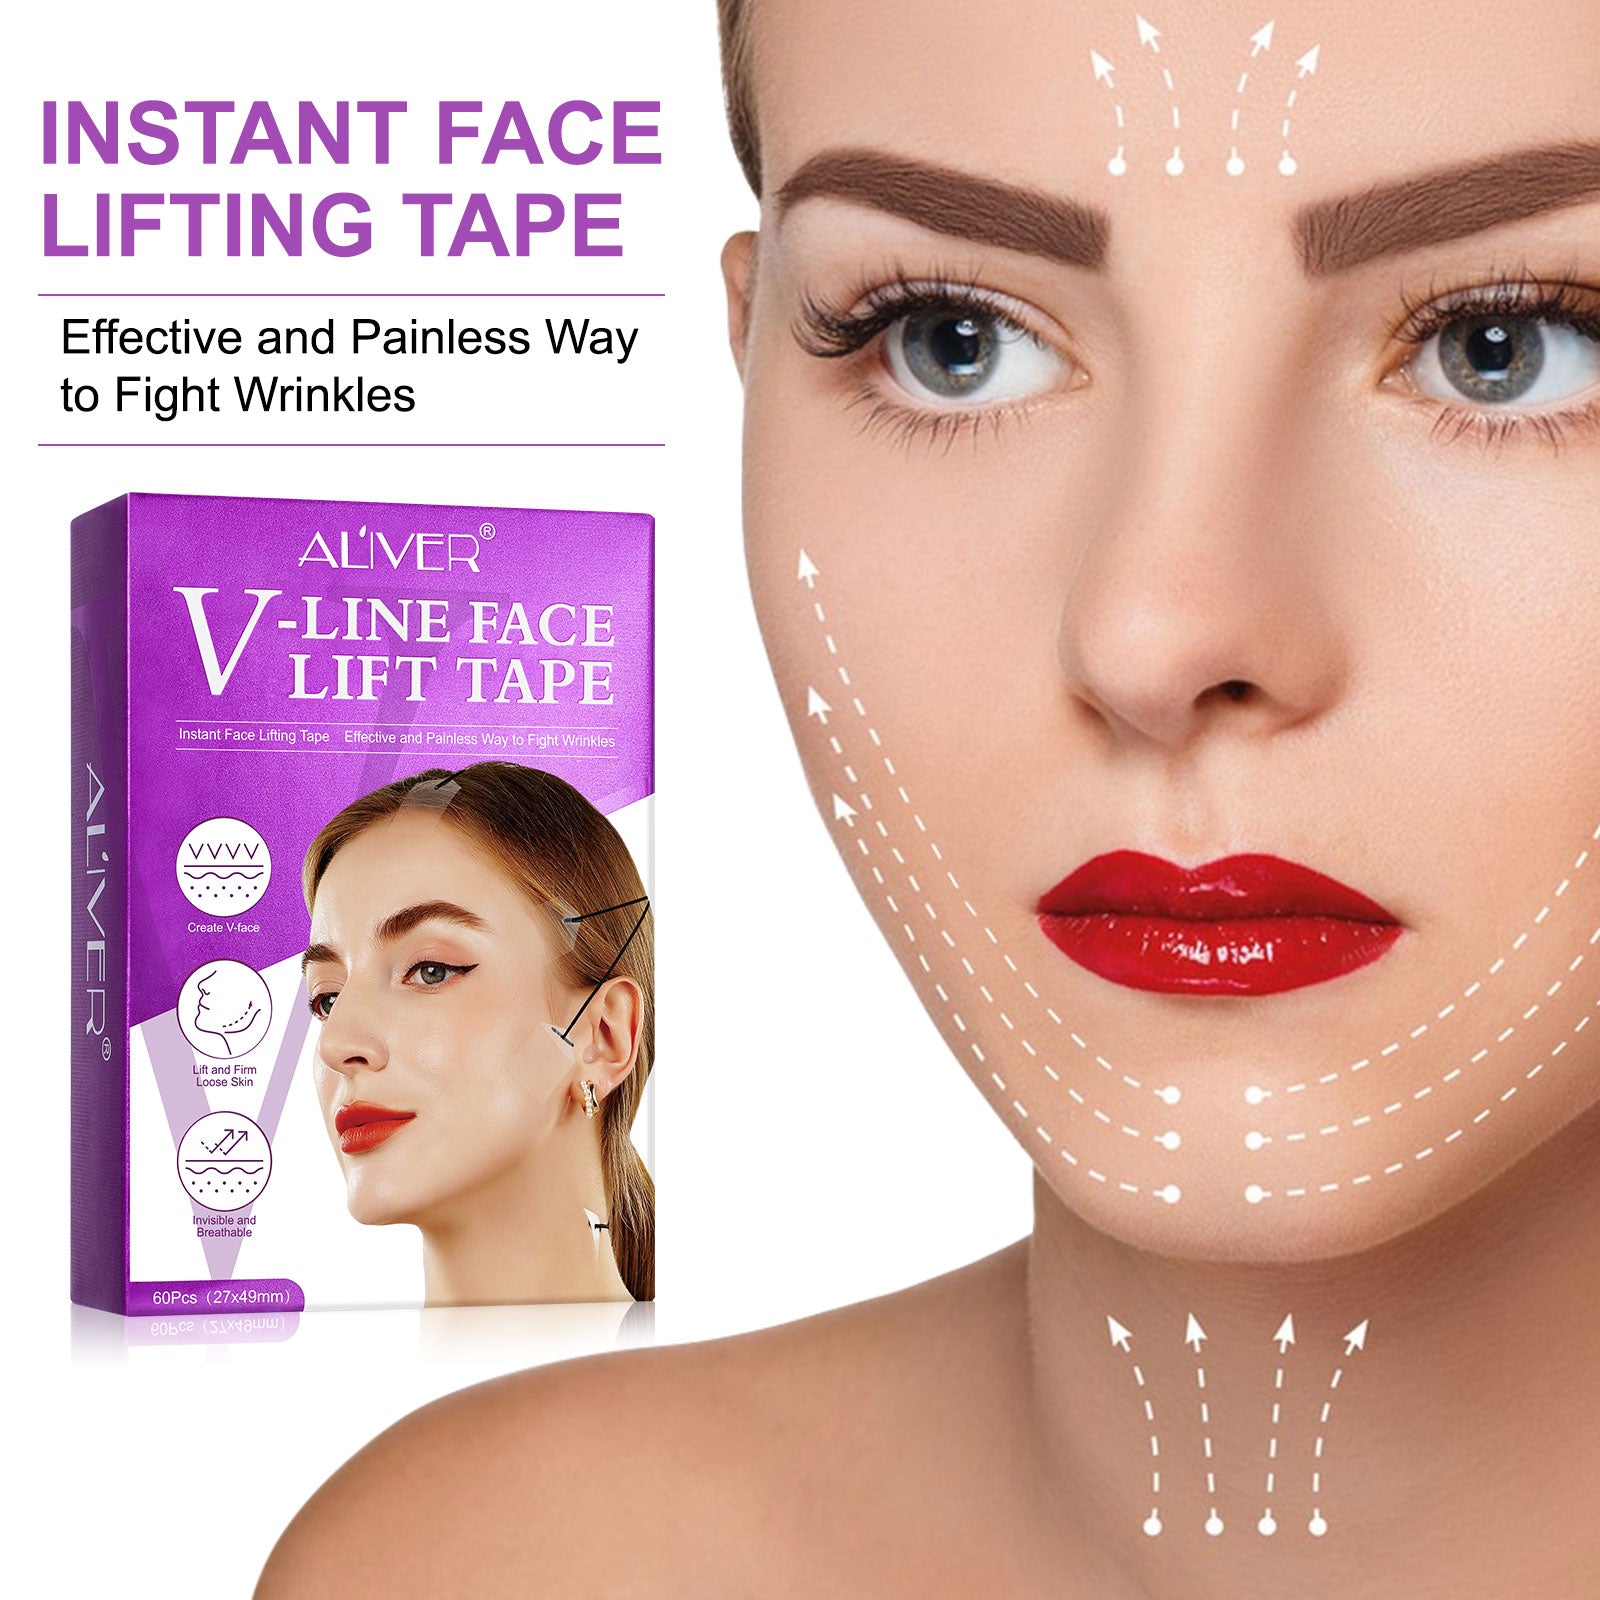 Aliver Instant Face Lifting Tape, Effective and Painless Way to